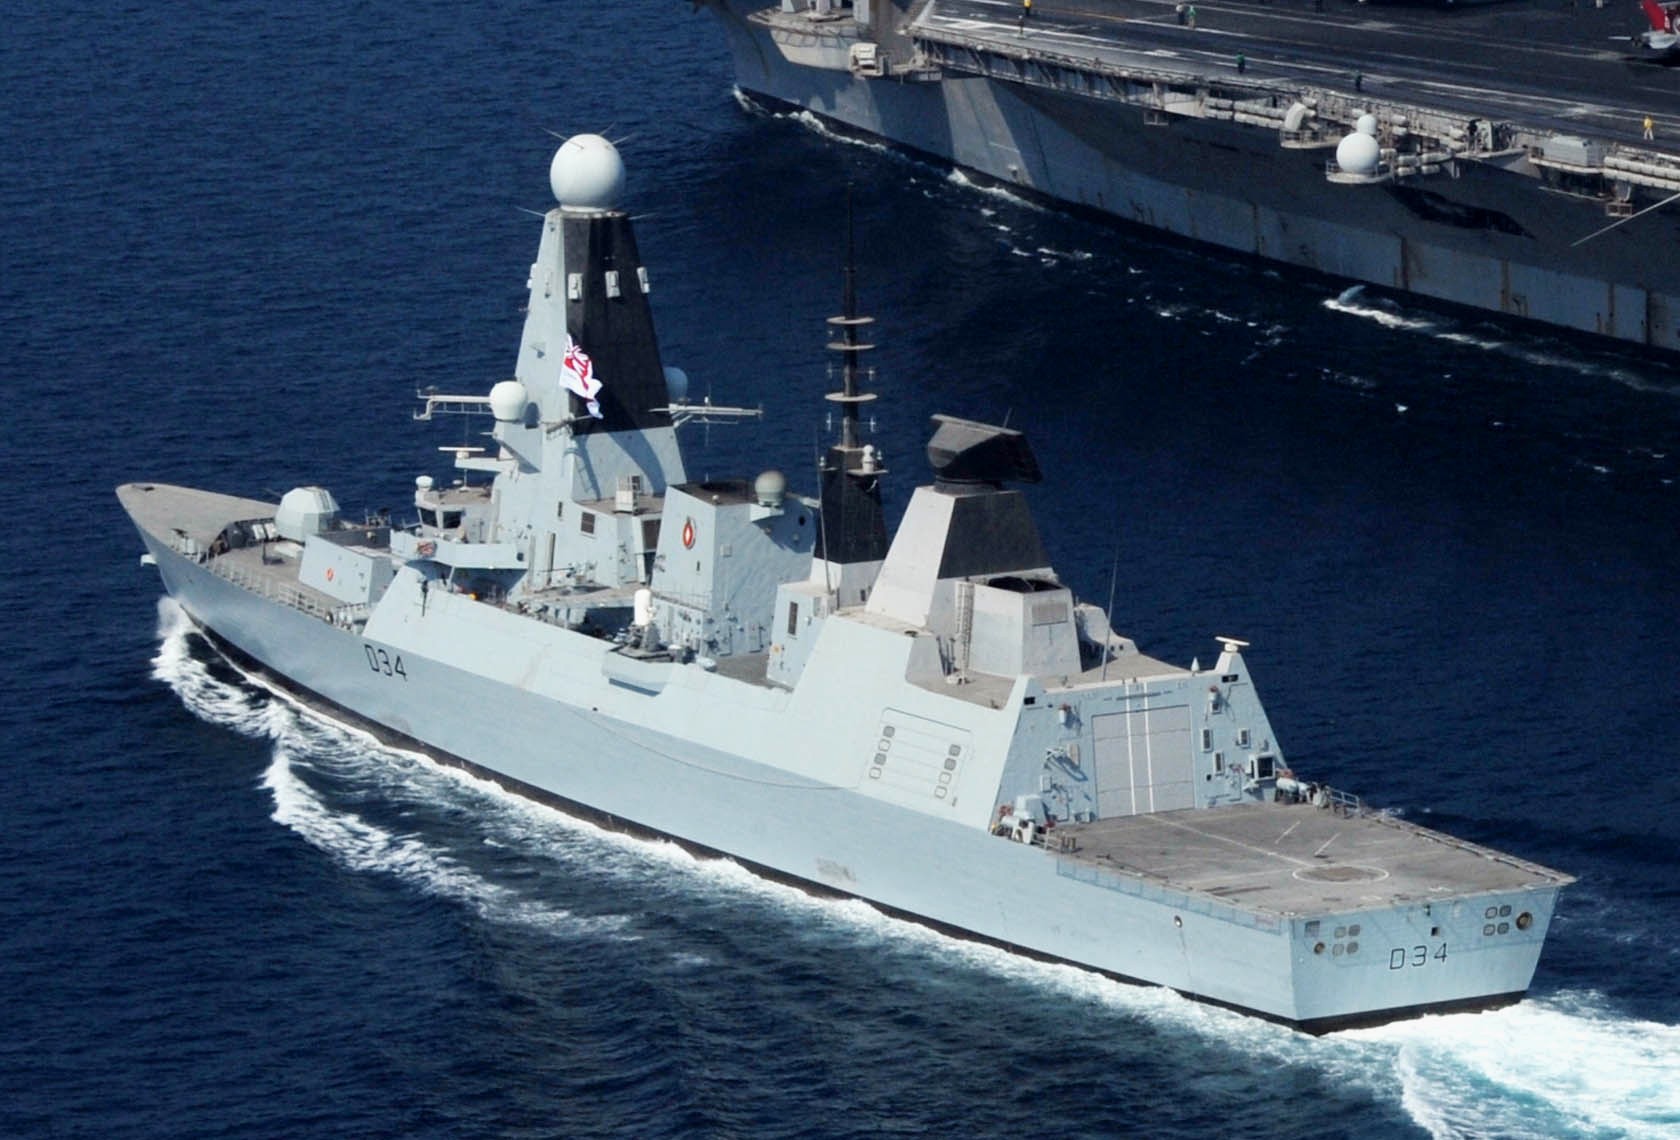 hms diamond d-34 type 45 daring class guided missile destroyer ddg royal navy sea viper paams 26